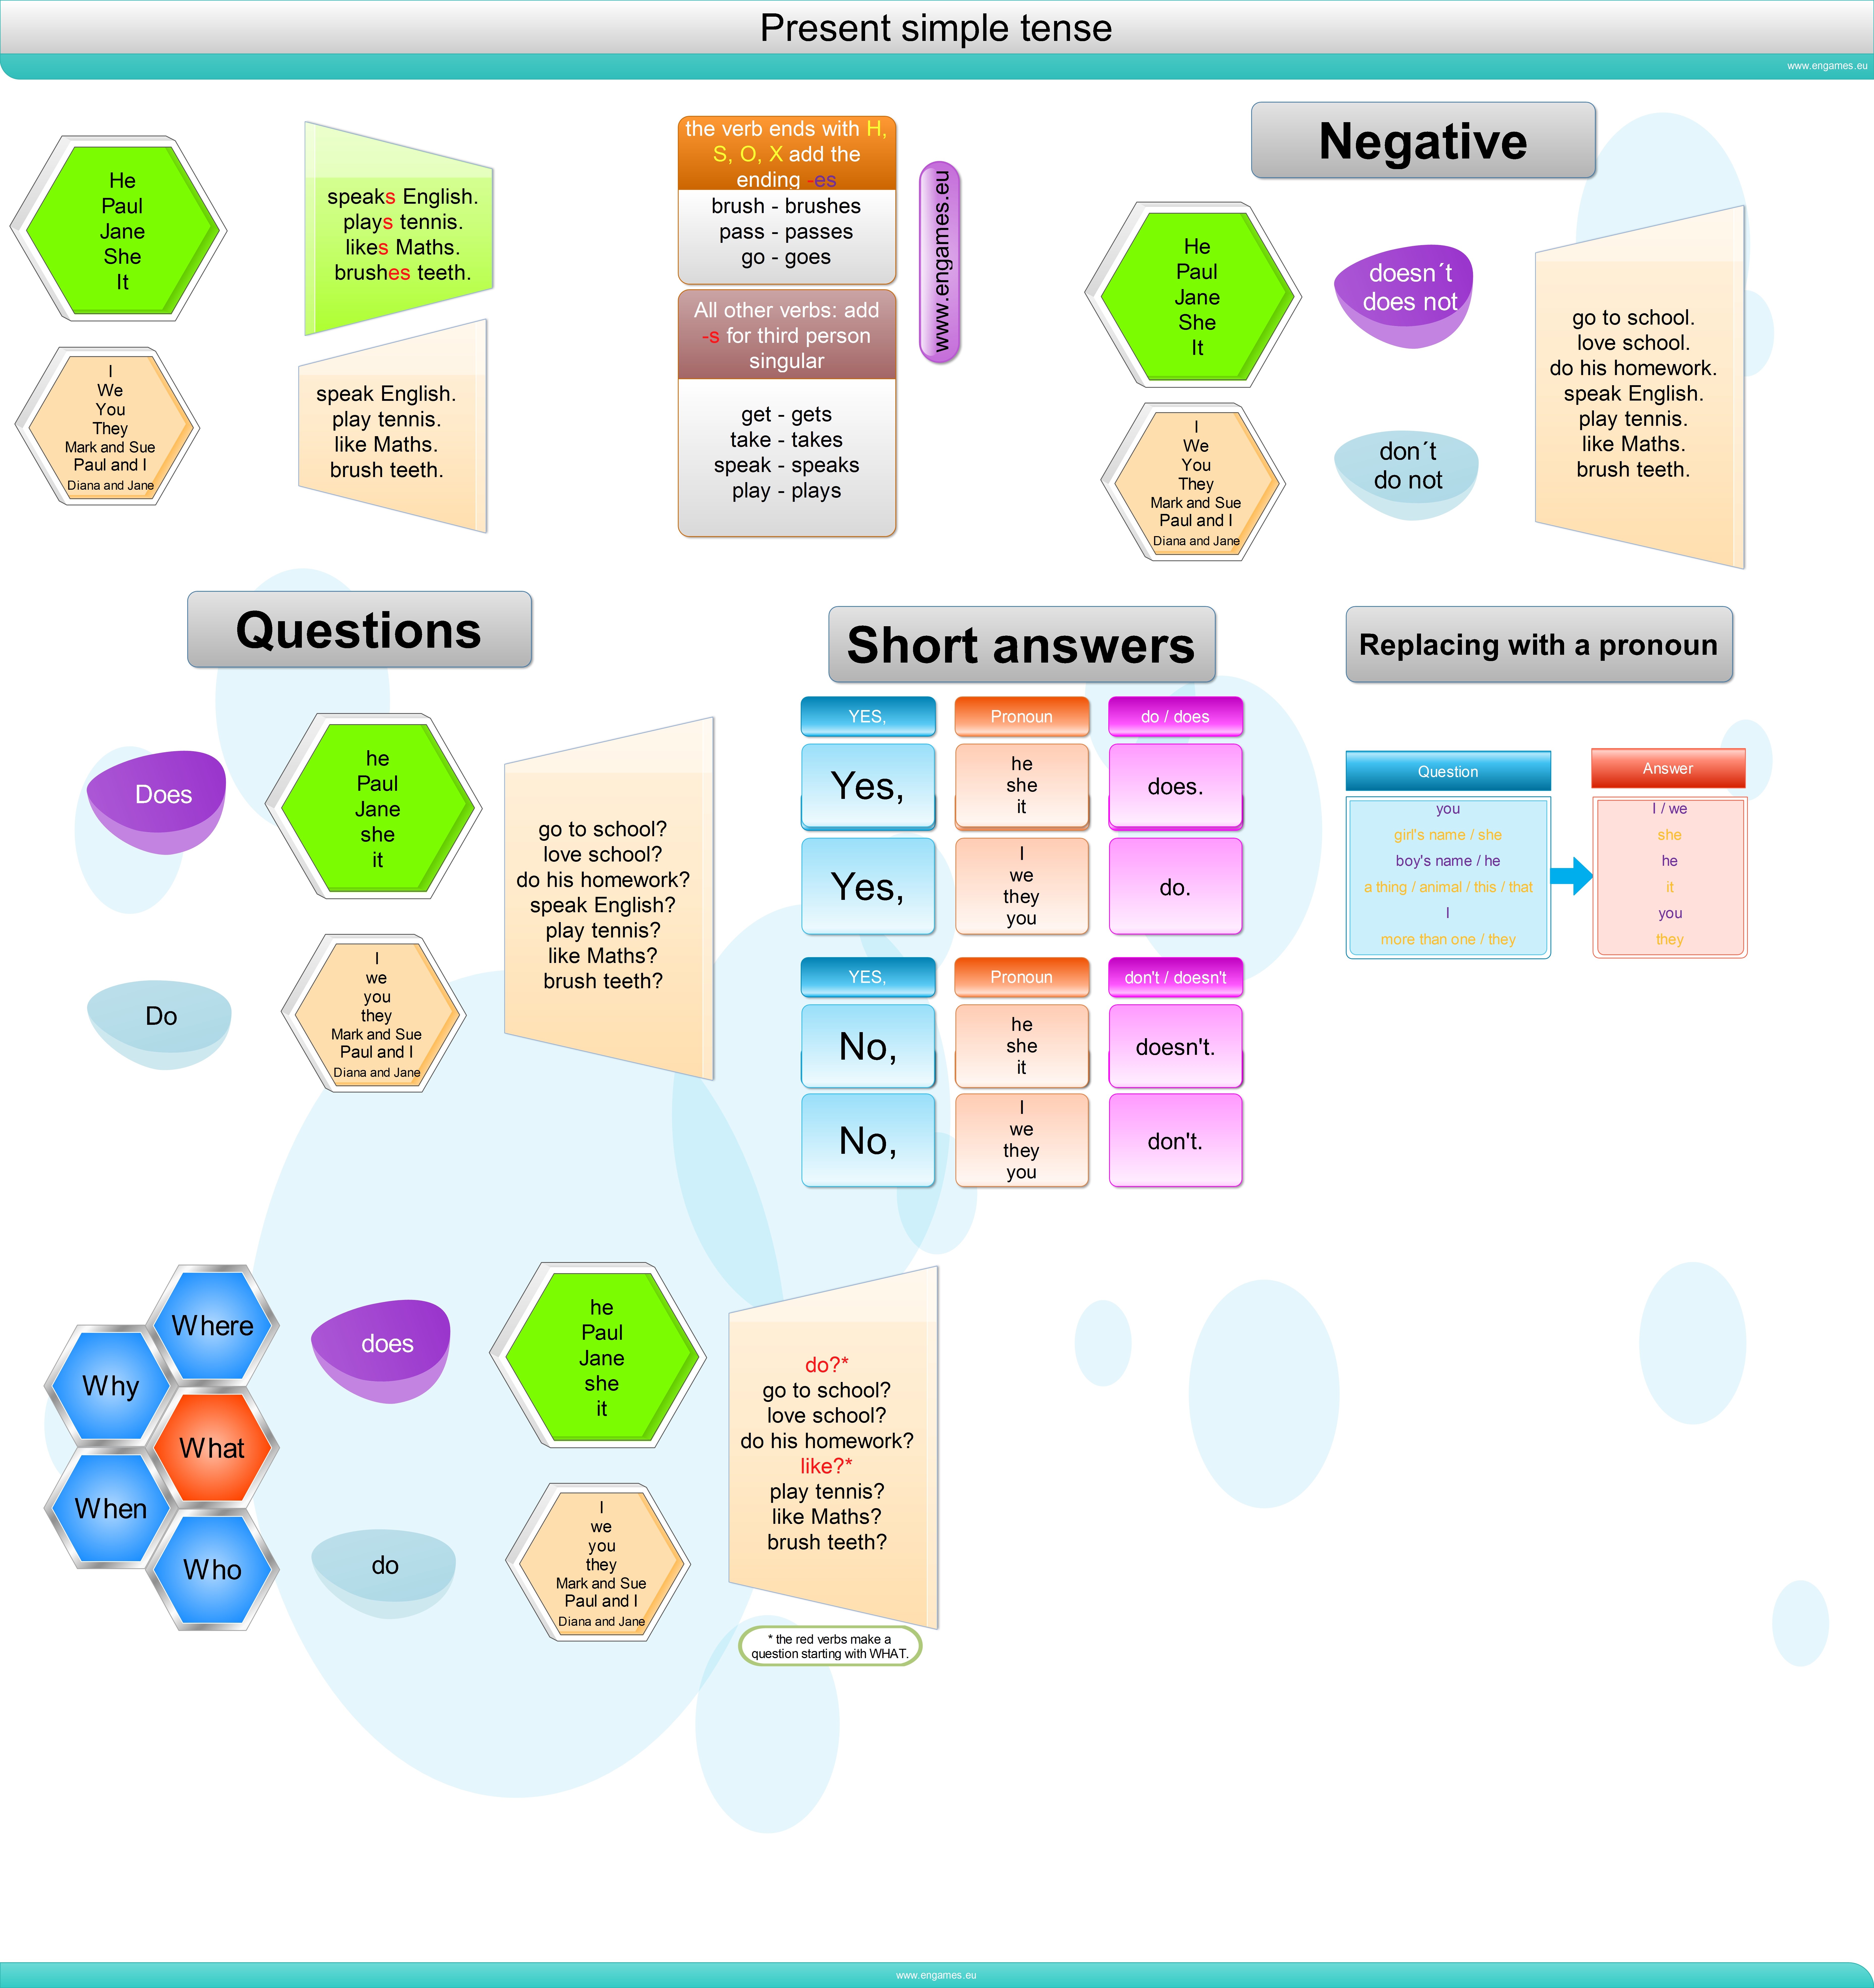 Present simpe tense complet mind map